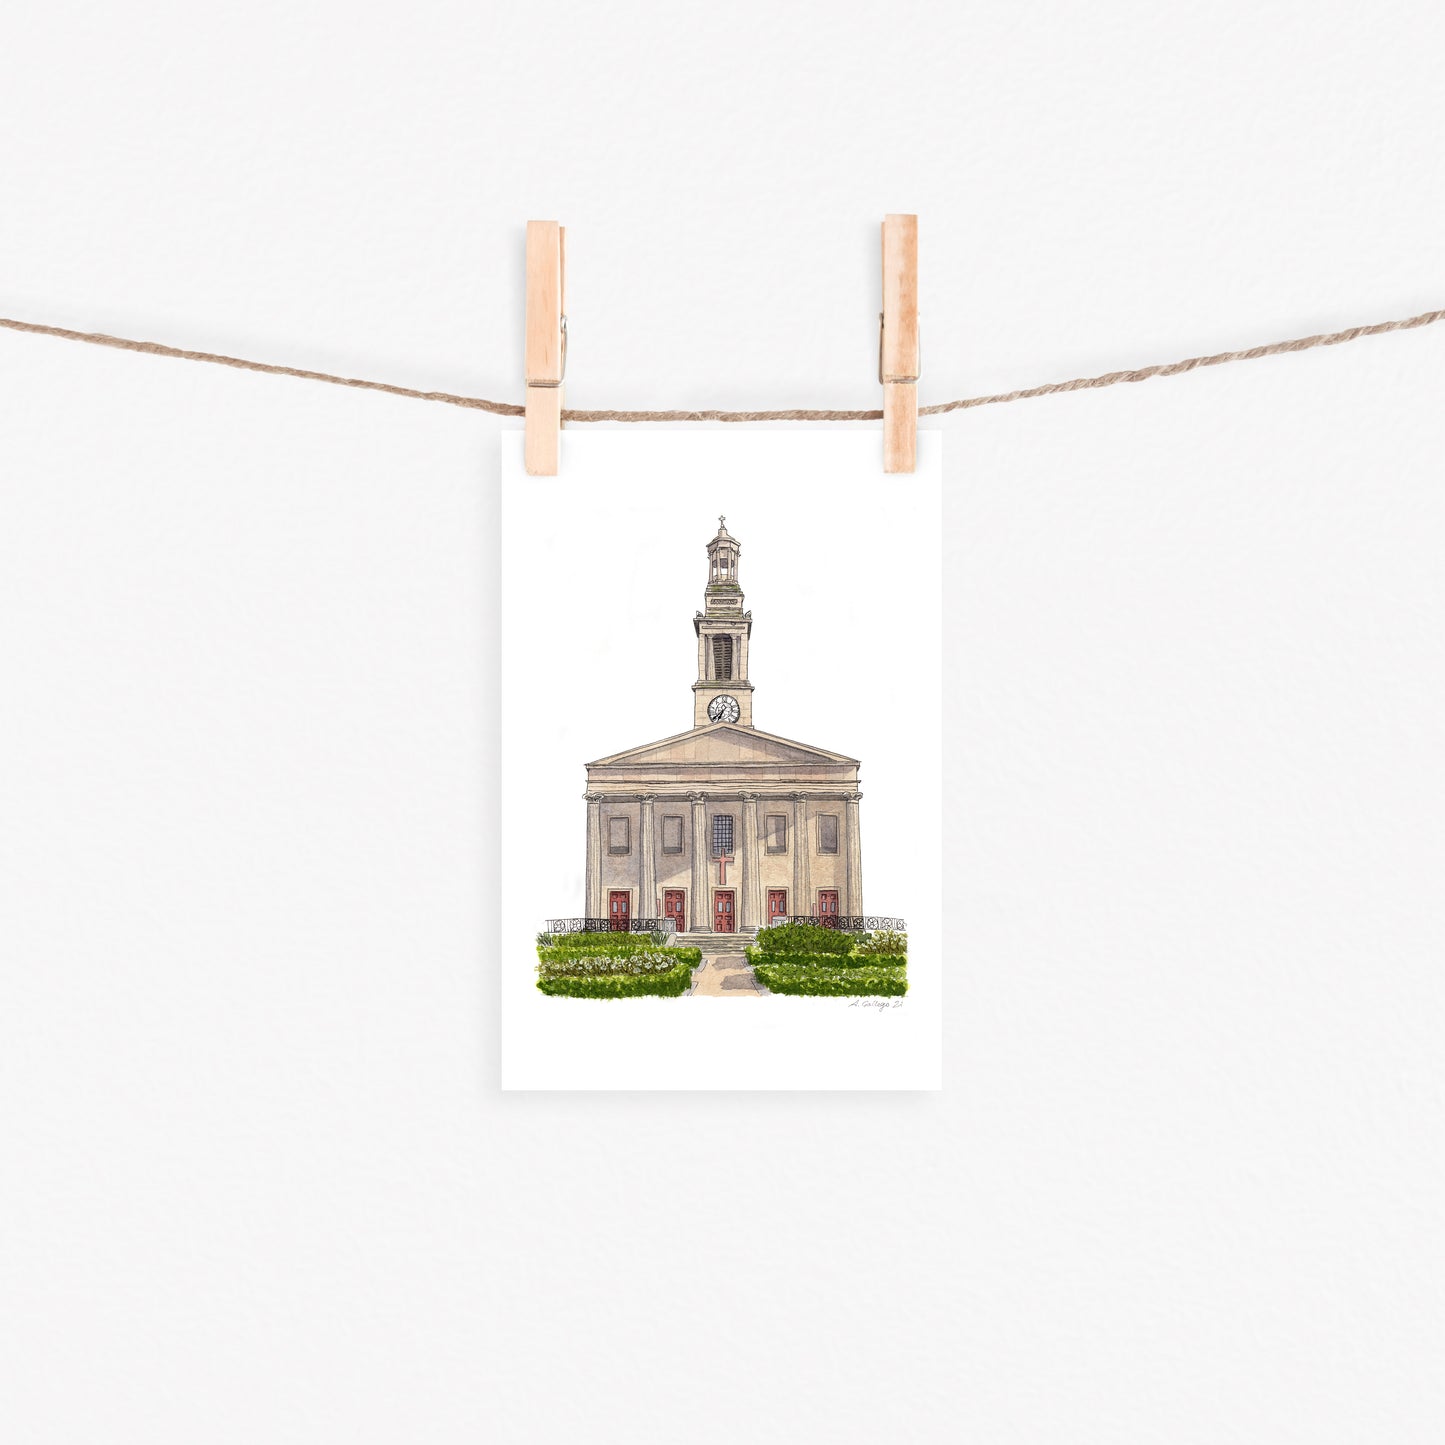 West Norwood - St Luke's Church - Greeting card with envelope